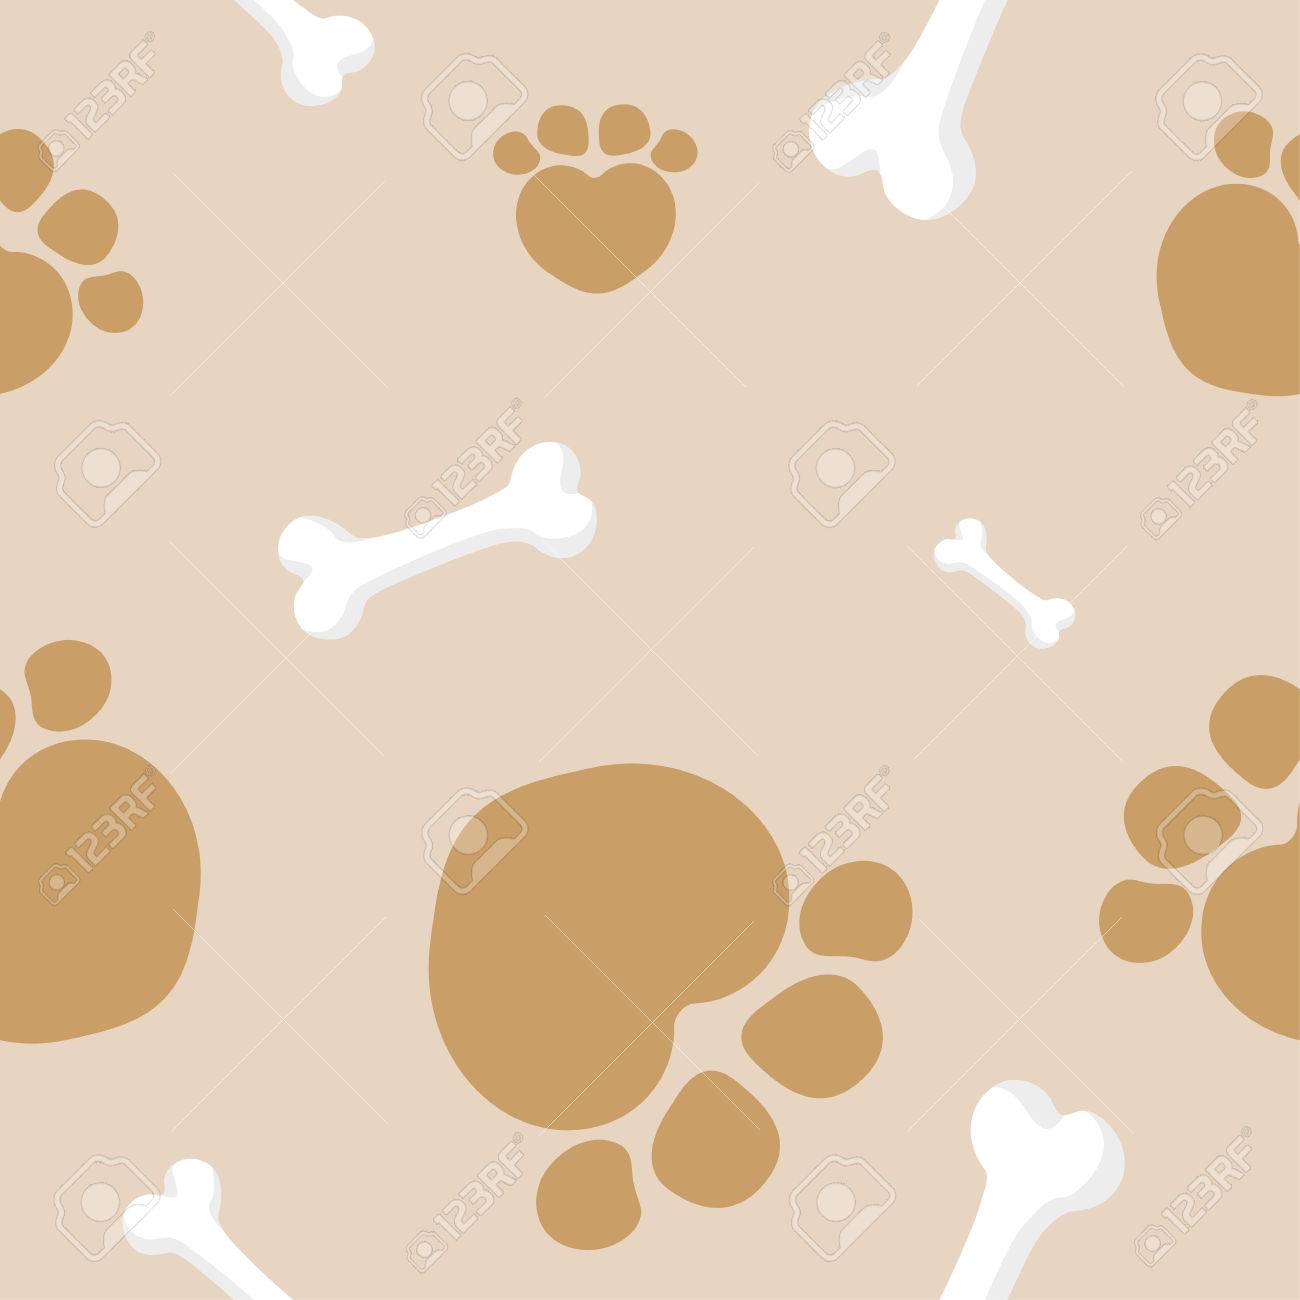 Illustration Background Wallpaper With Paws Of Pets And Dog Bones